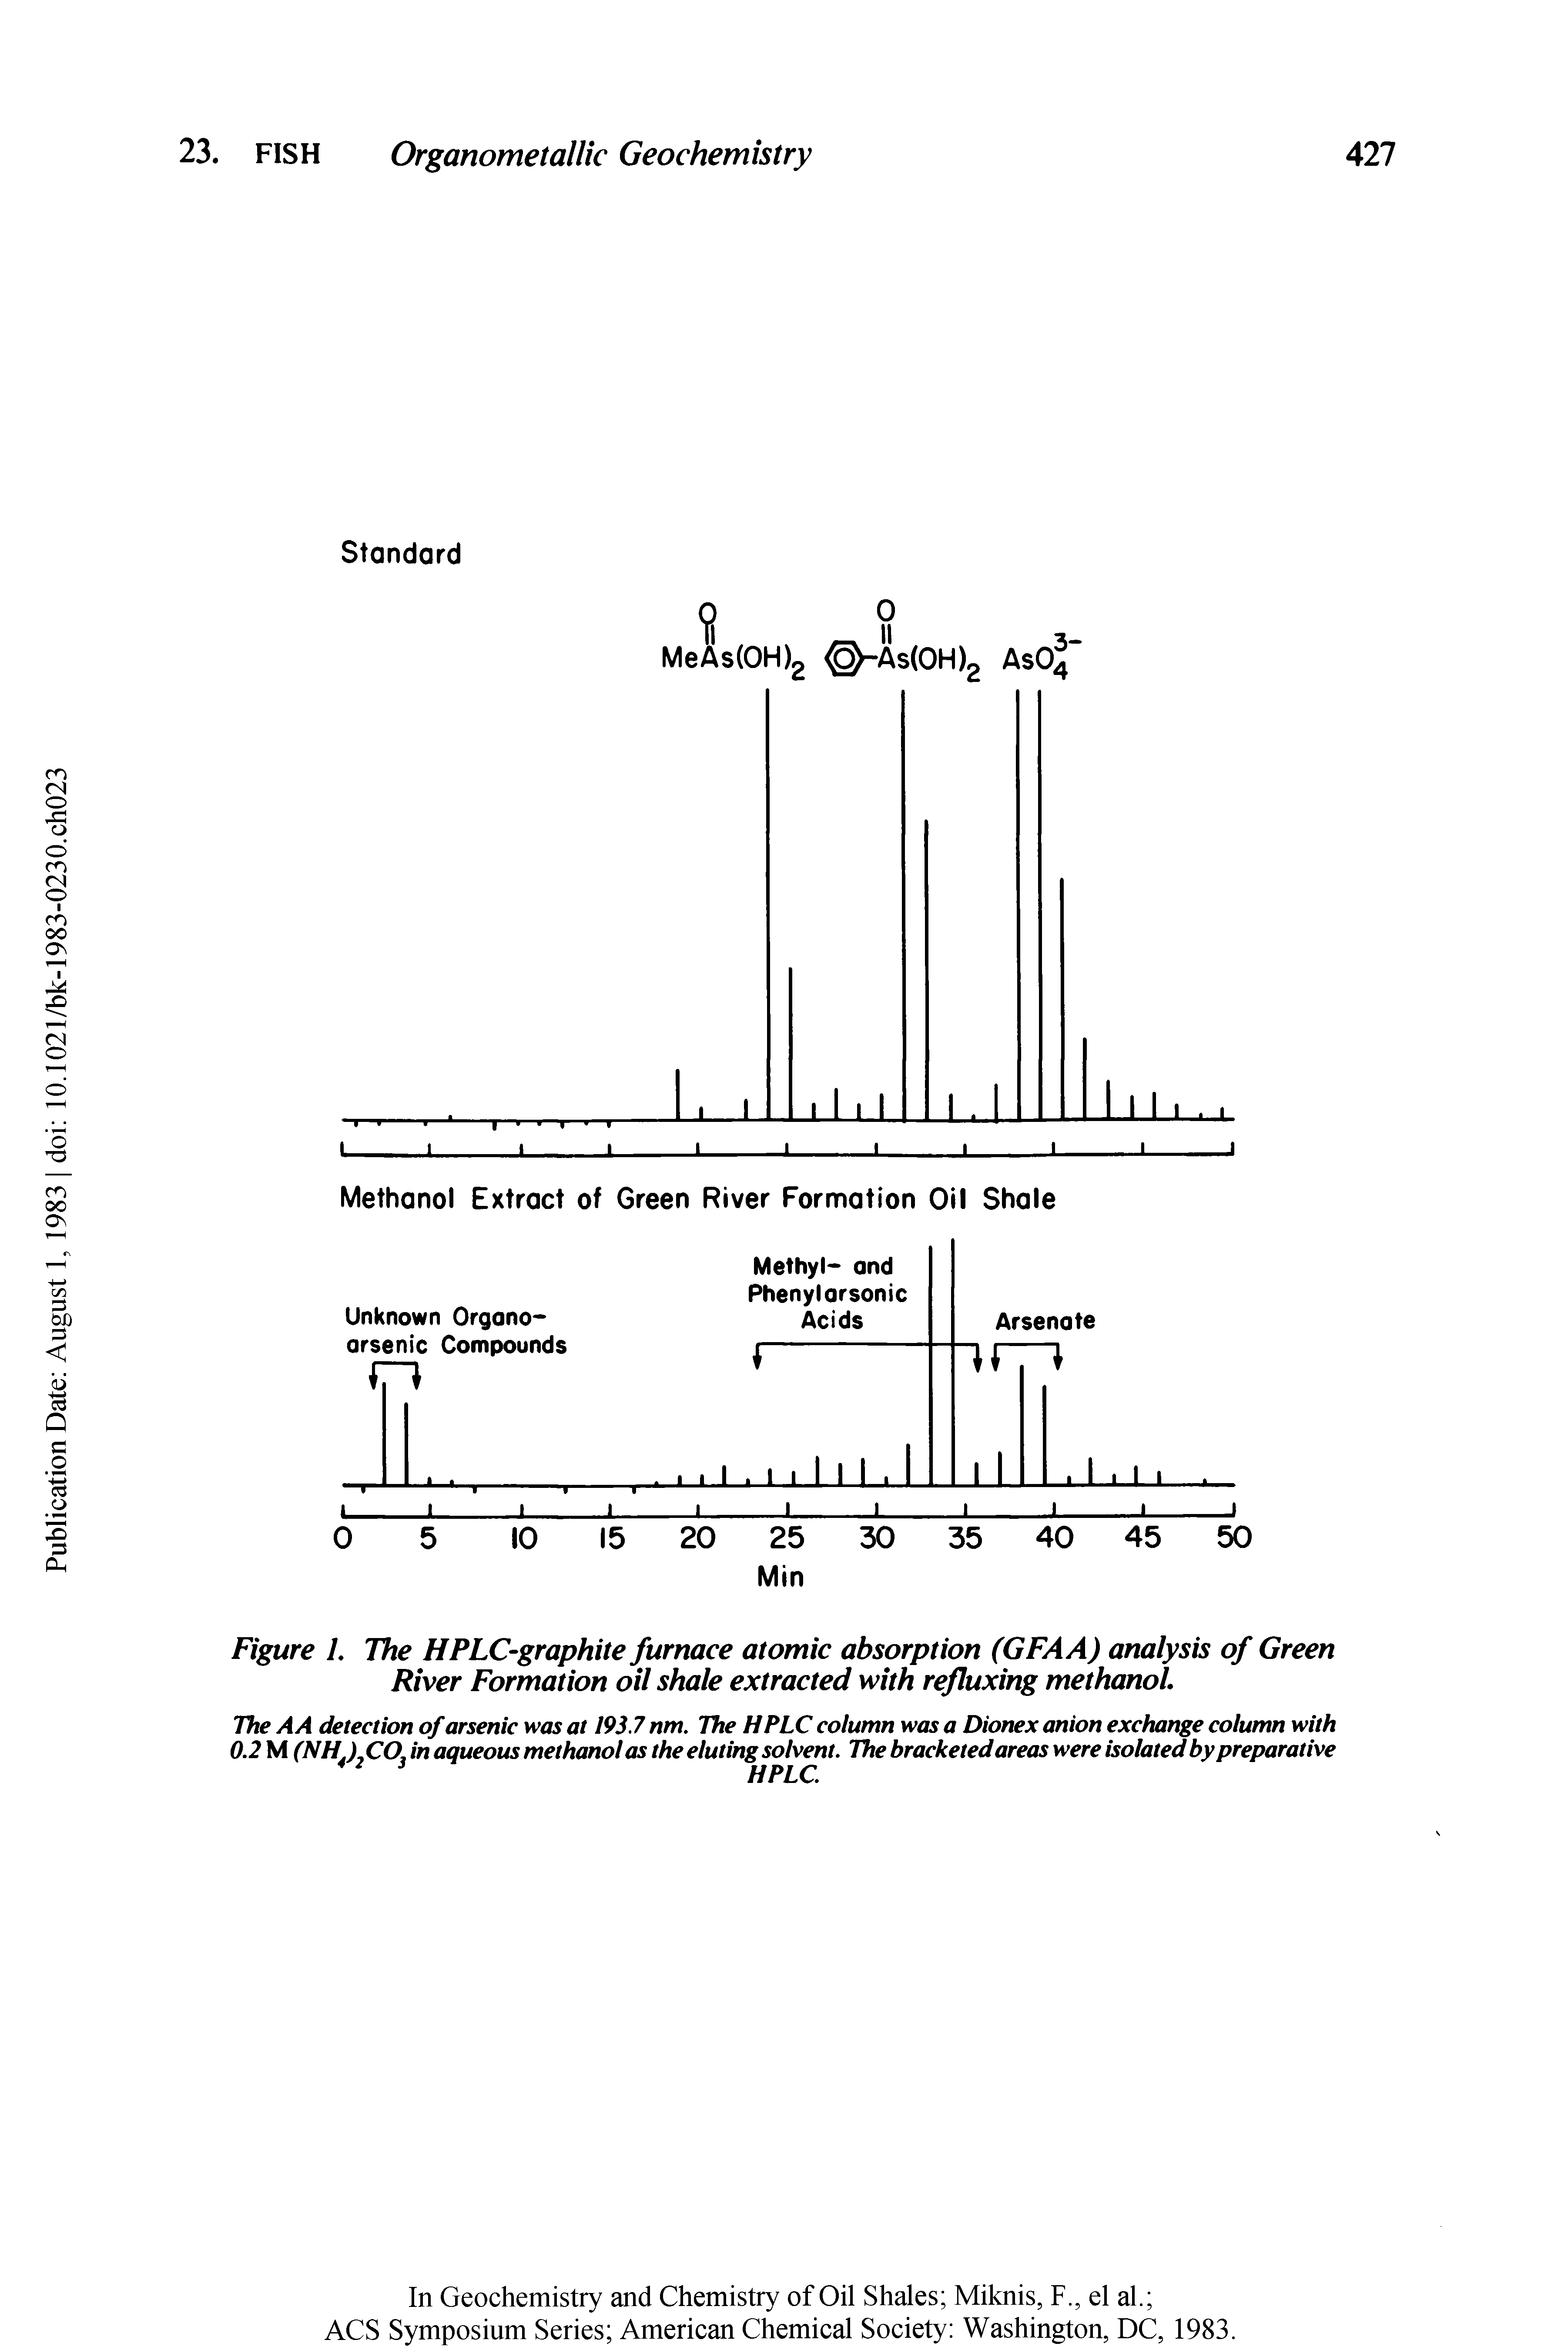 Figure 1. The HPLC-graphite furnace atomic absorption (GFAA) analysis of Green River Formation oil shale extracted with refluxing methanol...